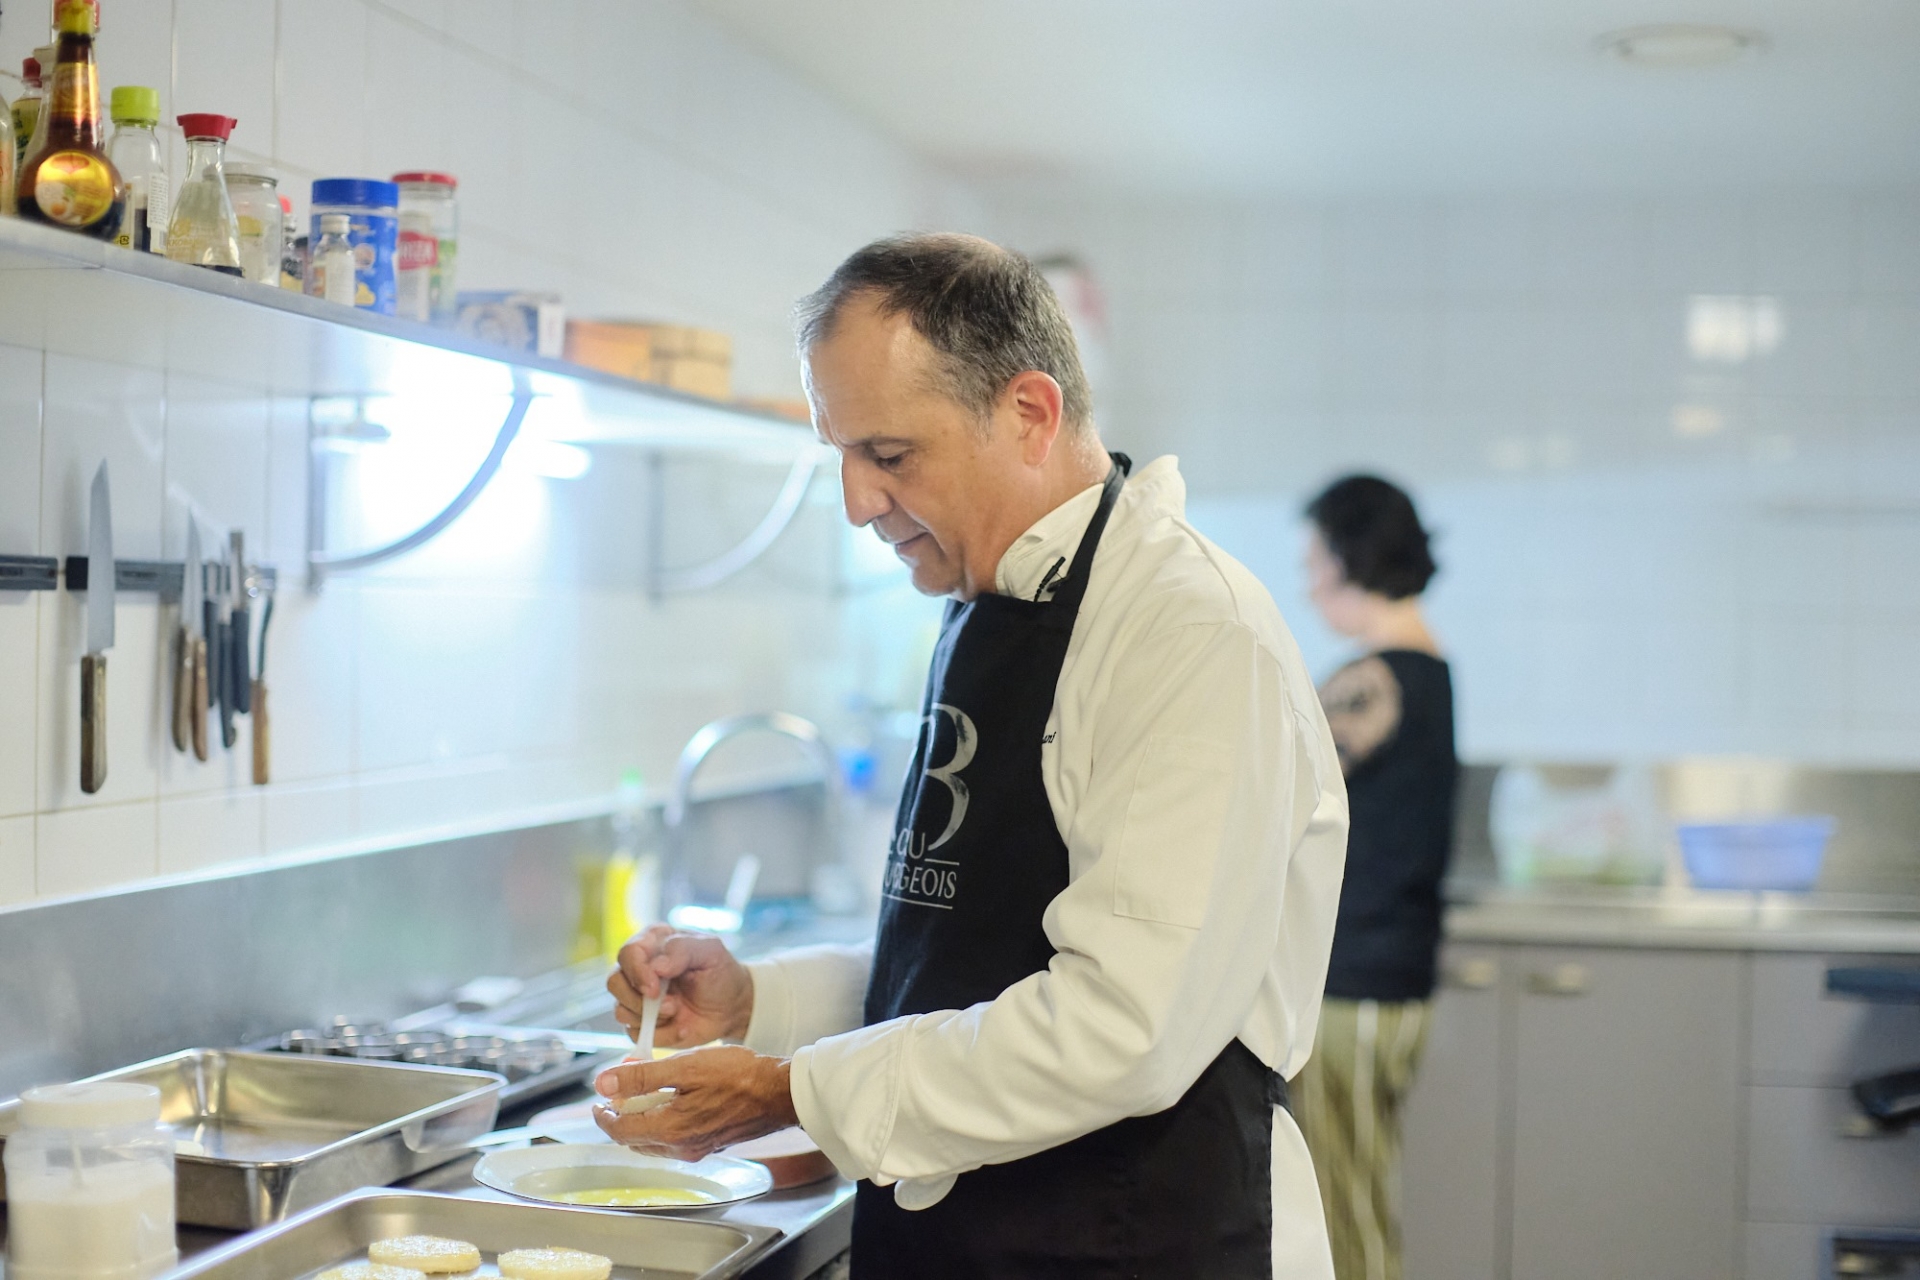 Diplomats cooking for charity activities